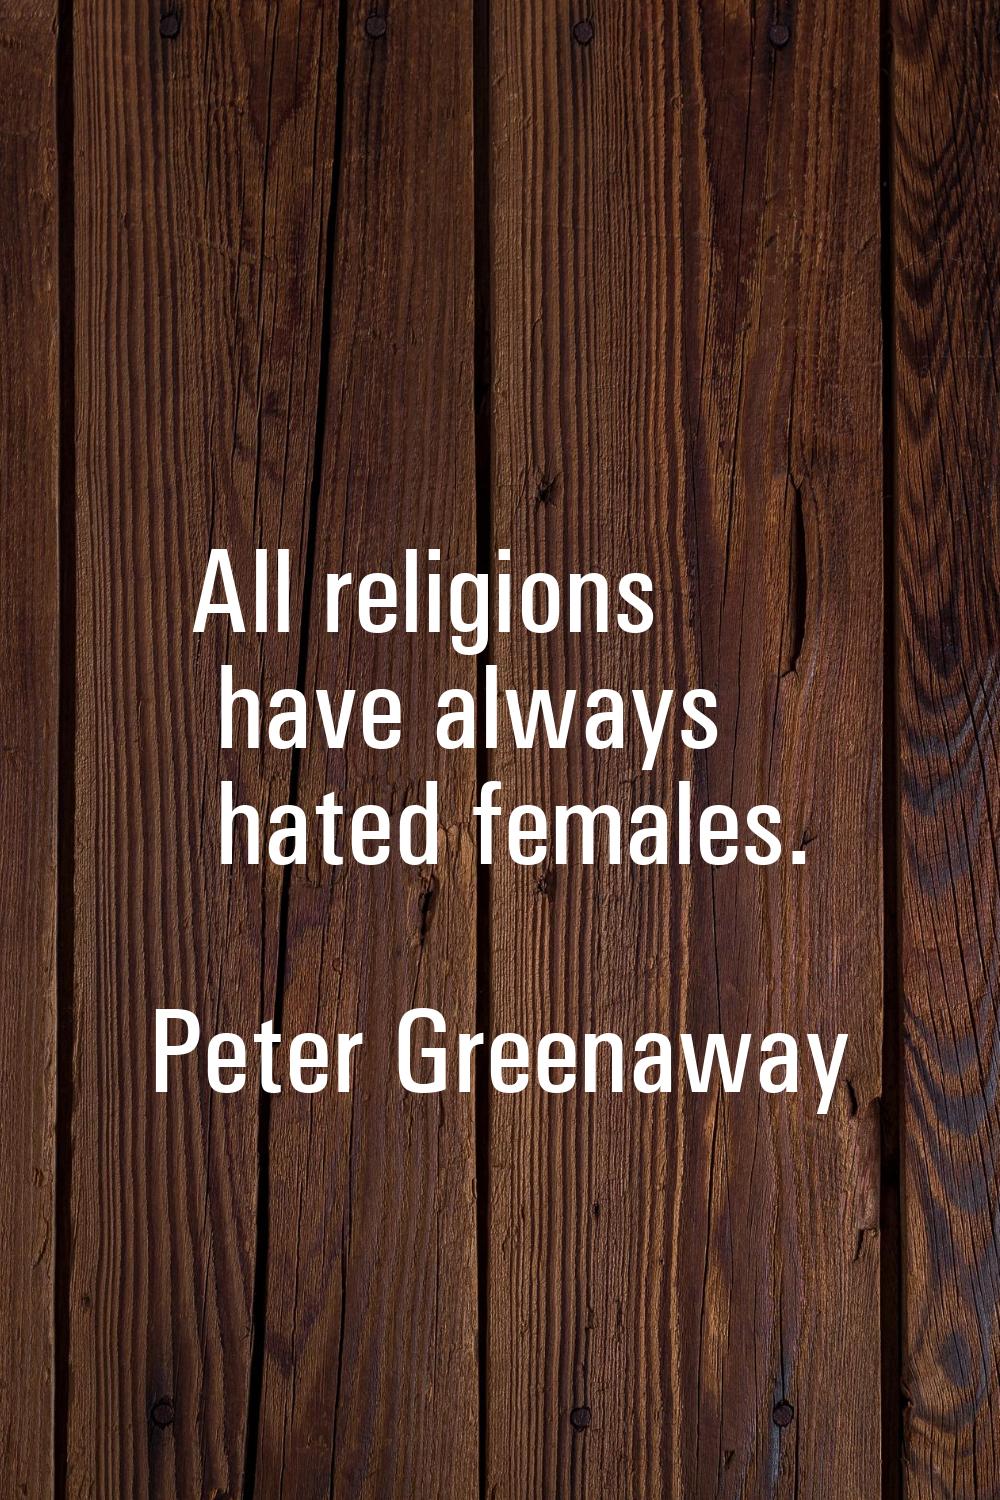 All religions have always hated females.